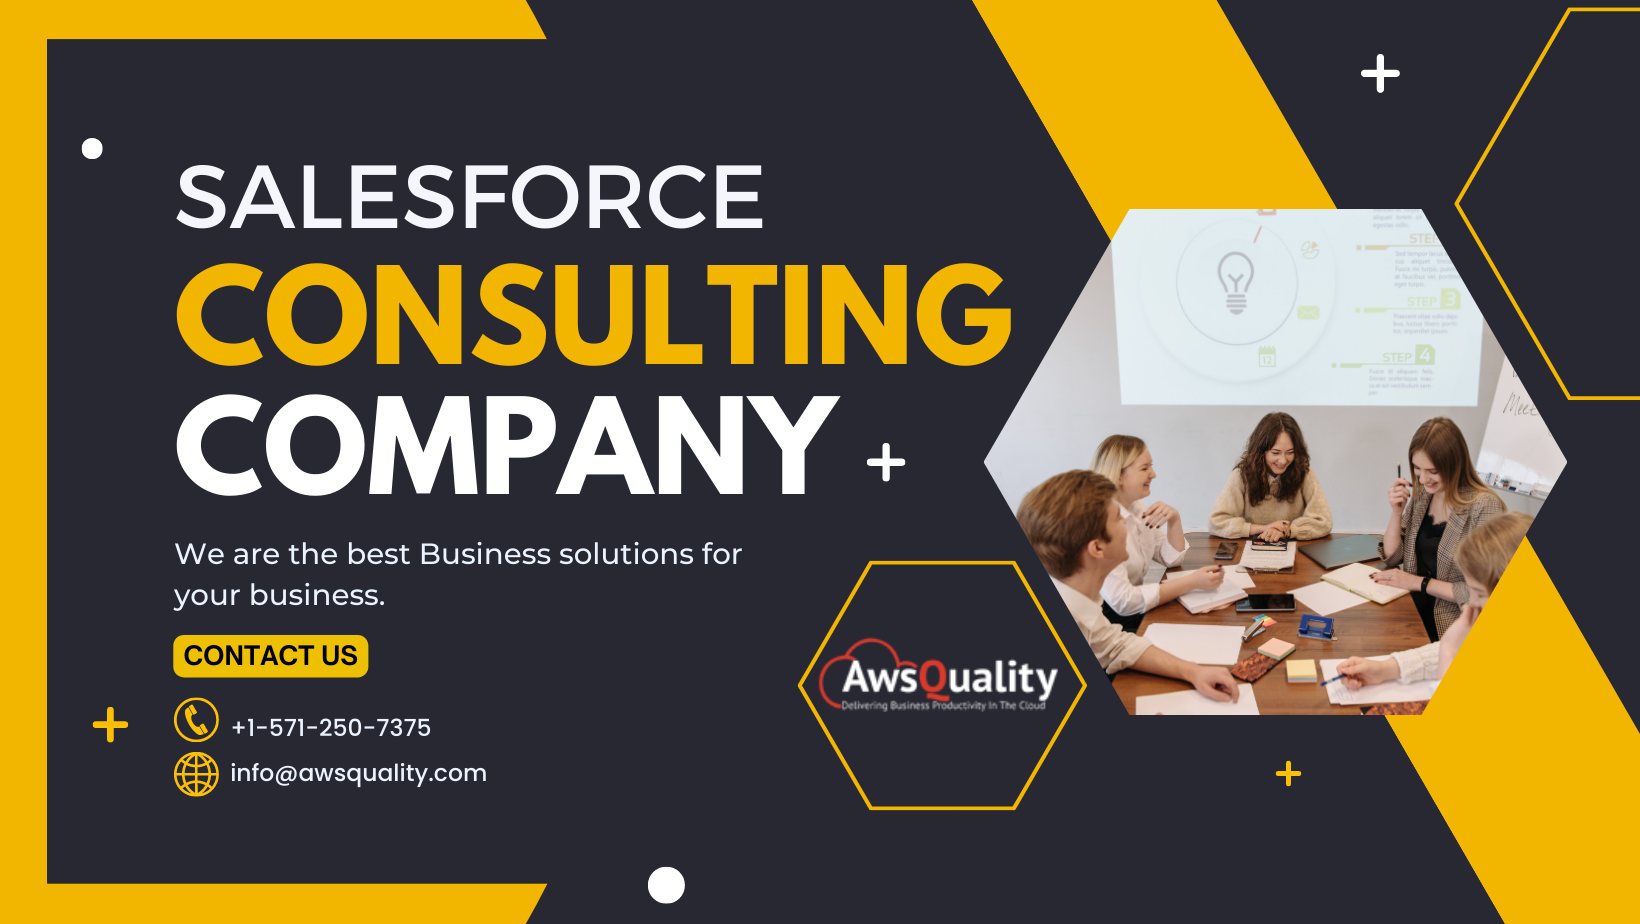 Top Salesforce Consulting Company-AwsQuality